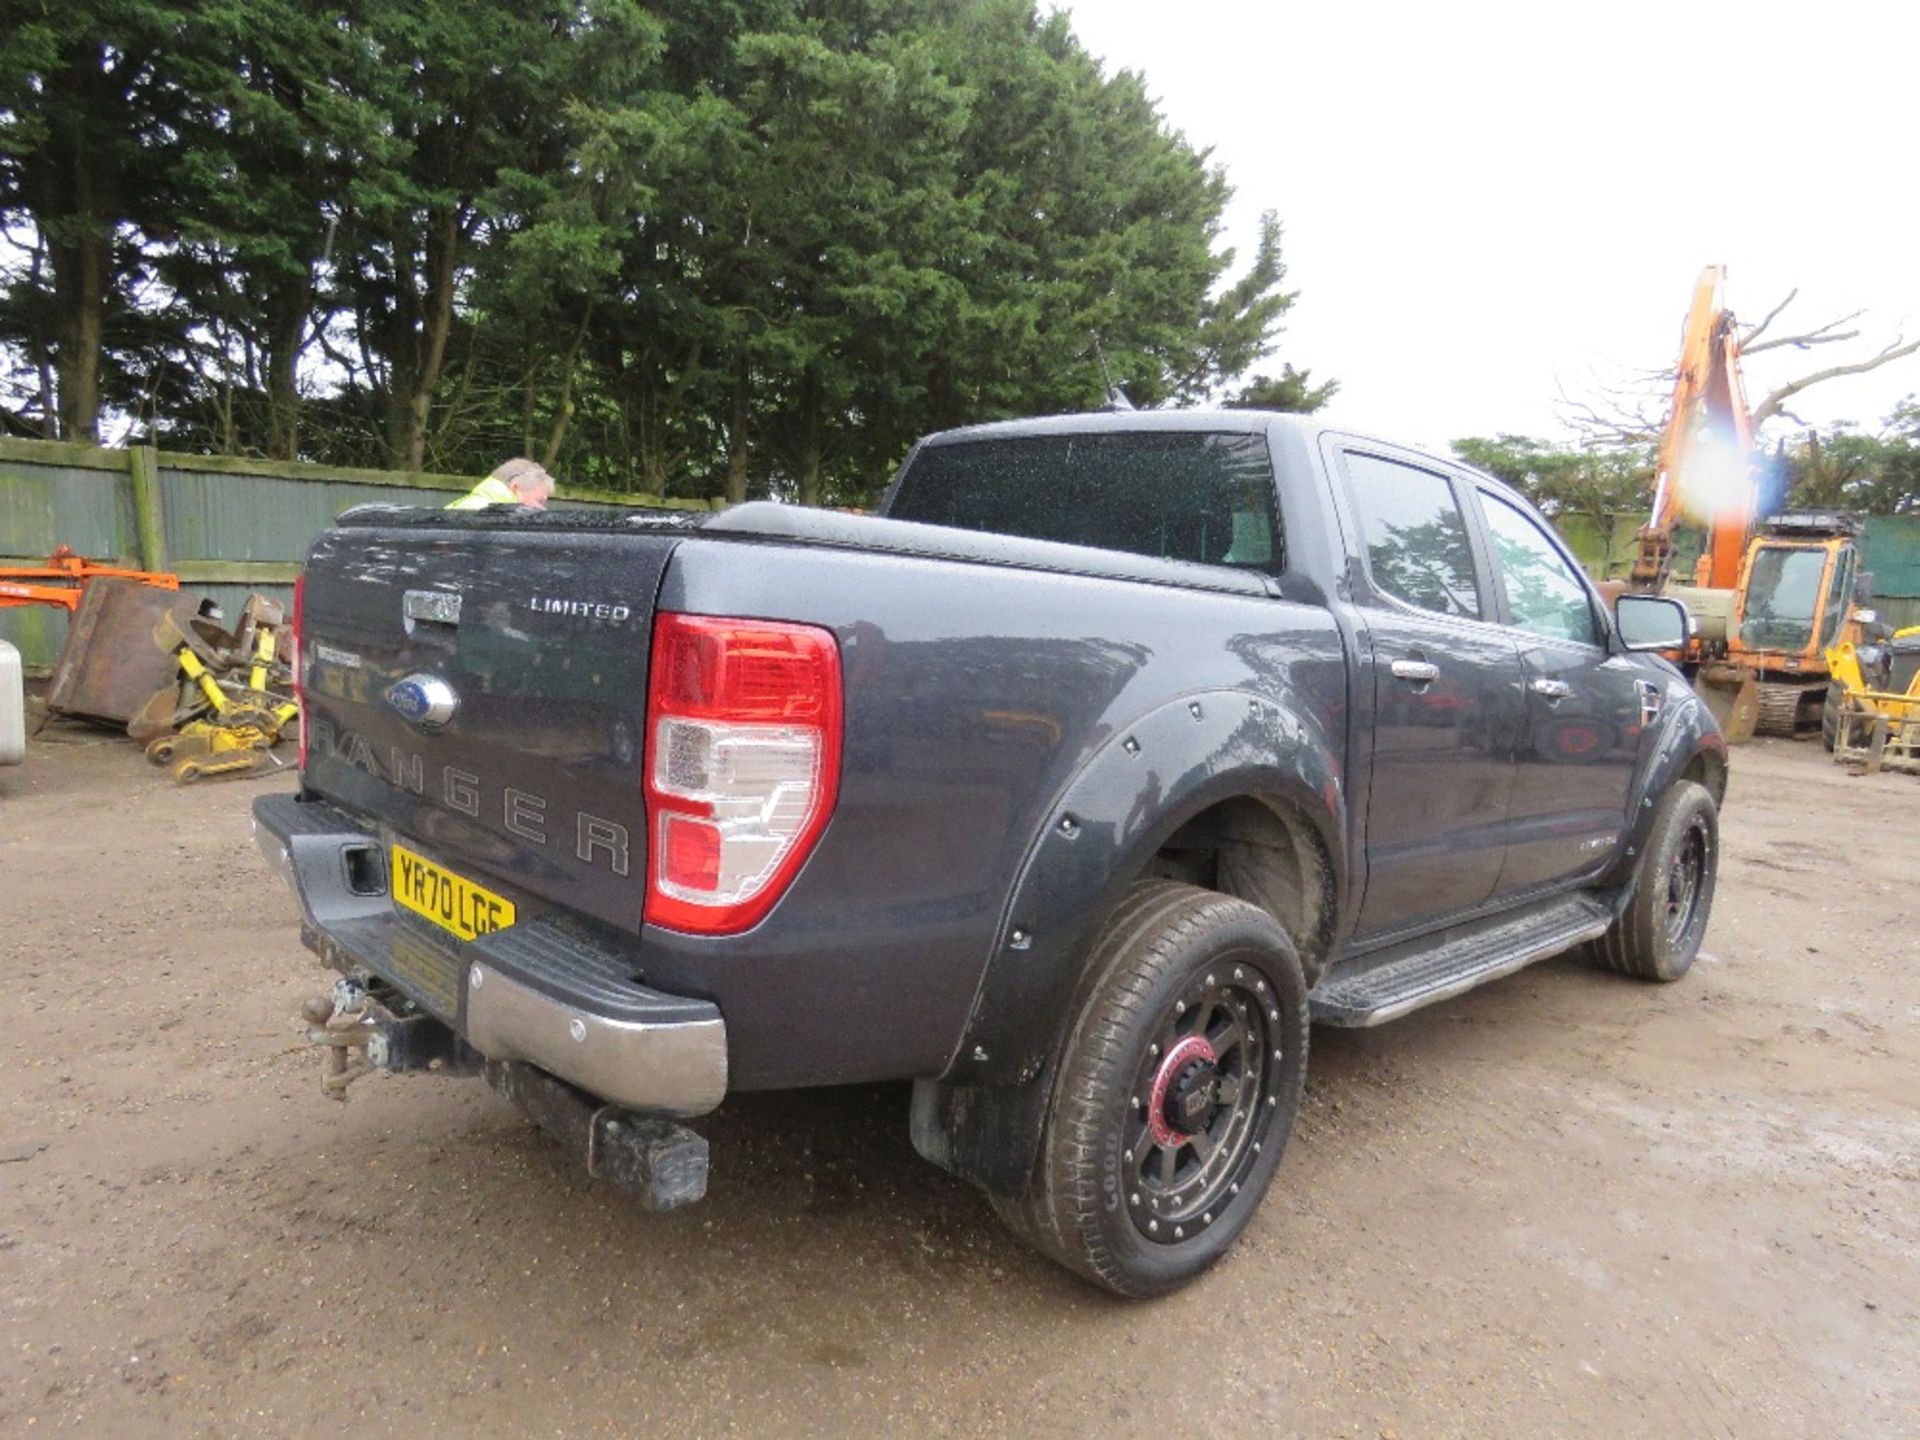 FORD RANGER LIMITED EDITION DOUBLE CAB PICKUP, AUTOMATIC, REG:YR70 LGF. 110,287 REC MILES. 2 LITRE - Image 4 of 15